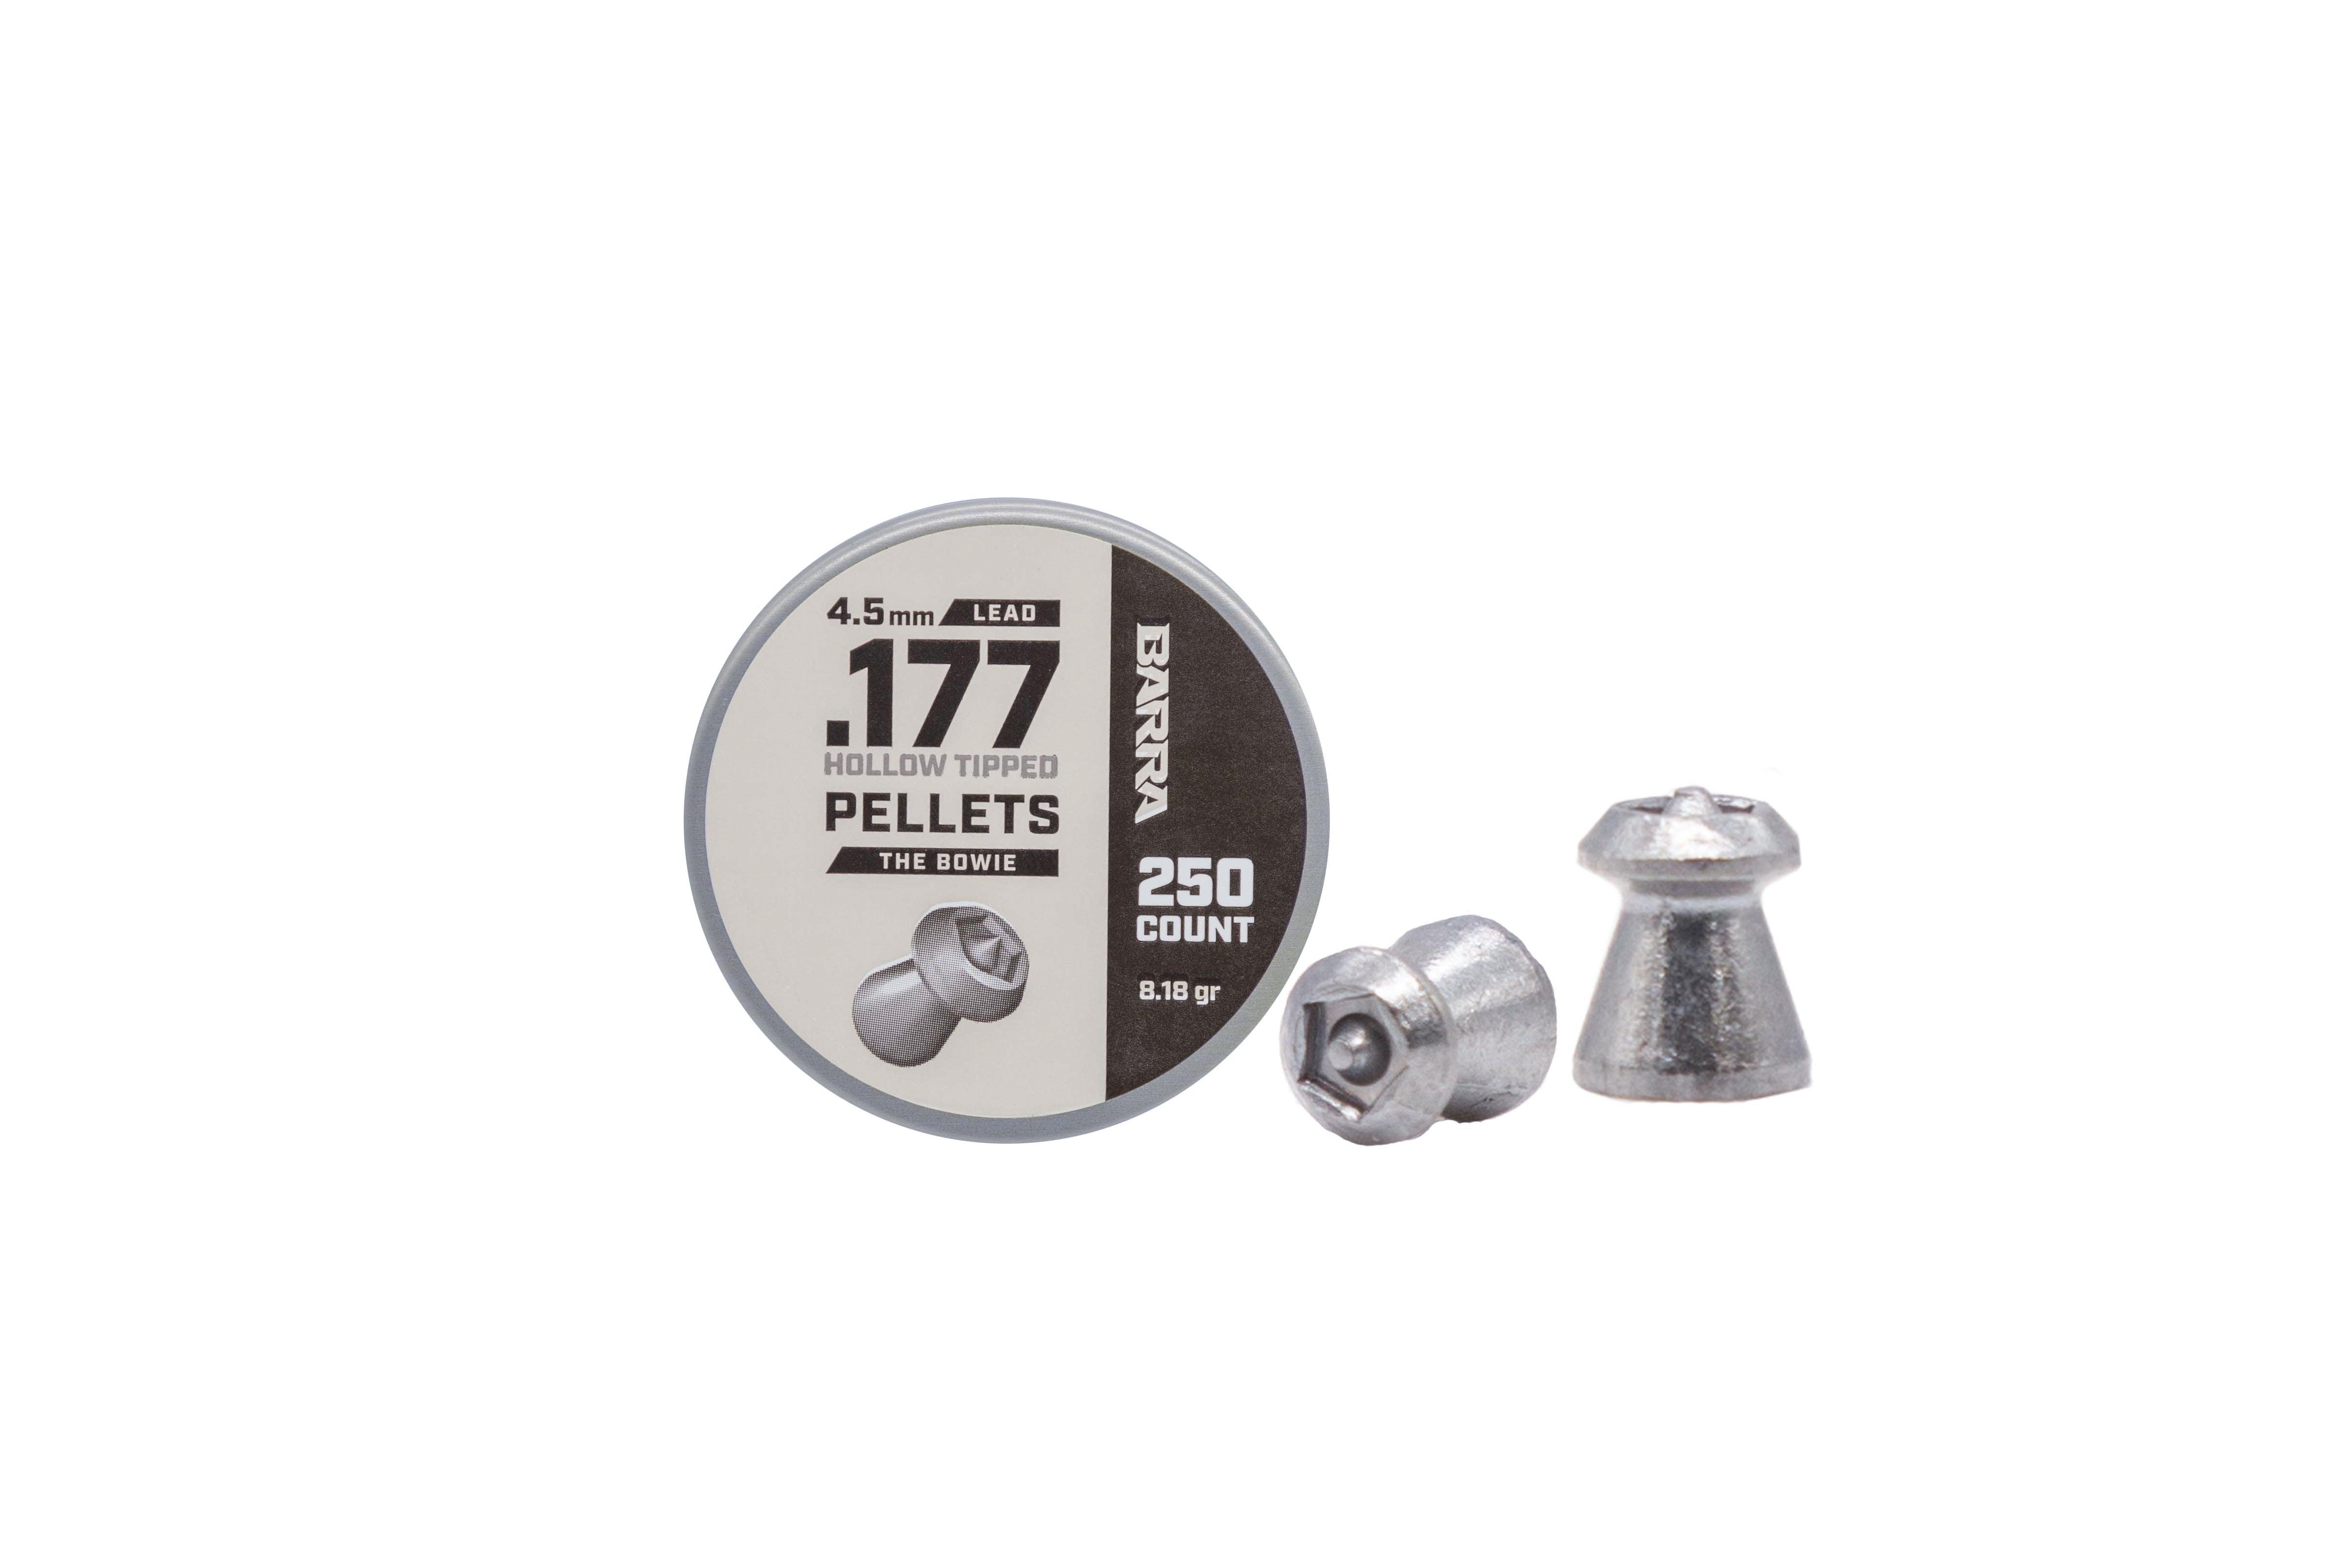 Barra Bowie Hollow Tipped .177 cal Pellets - 250ct, .177 (4.5mm), Silver